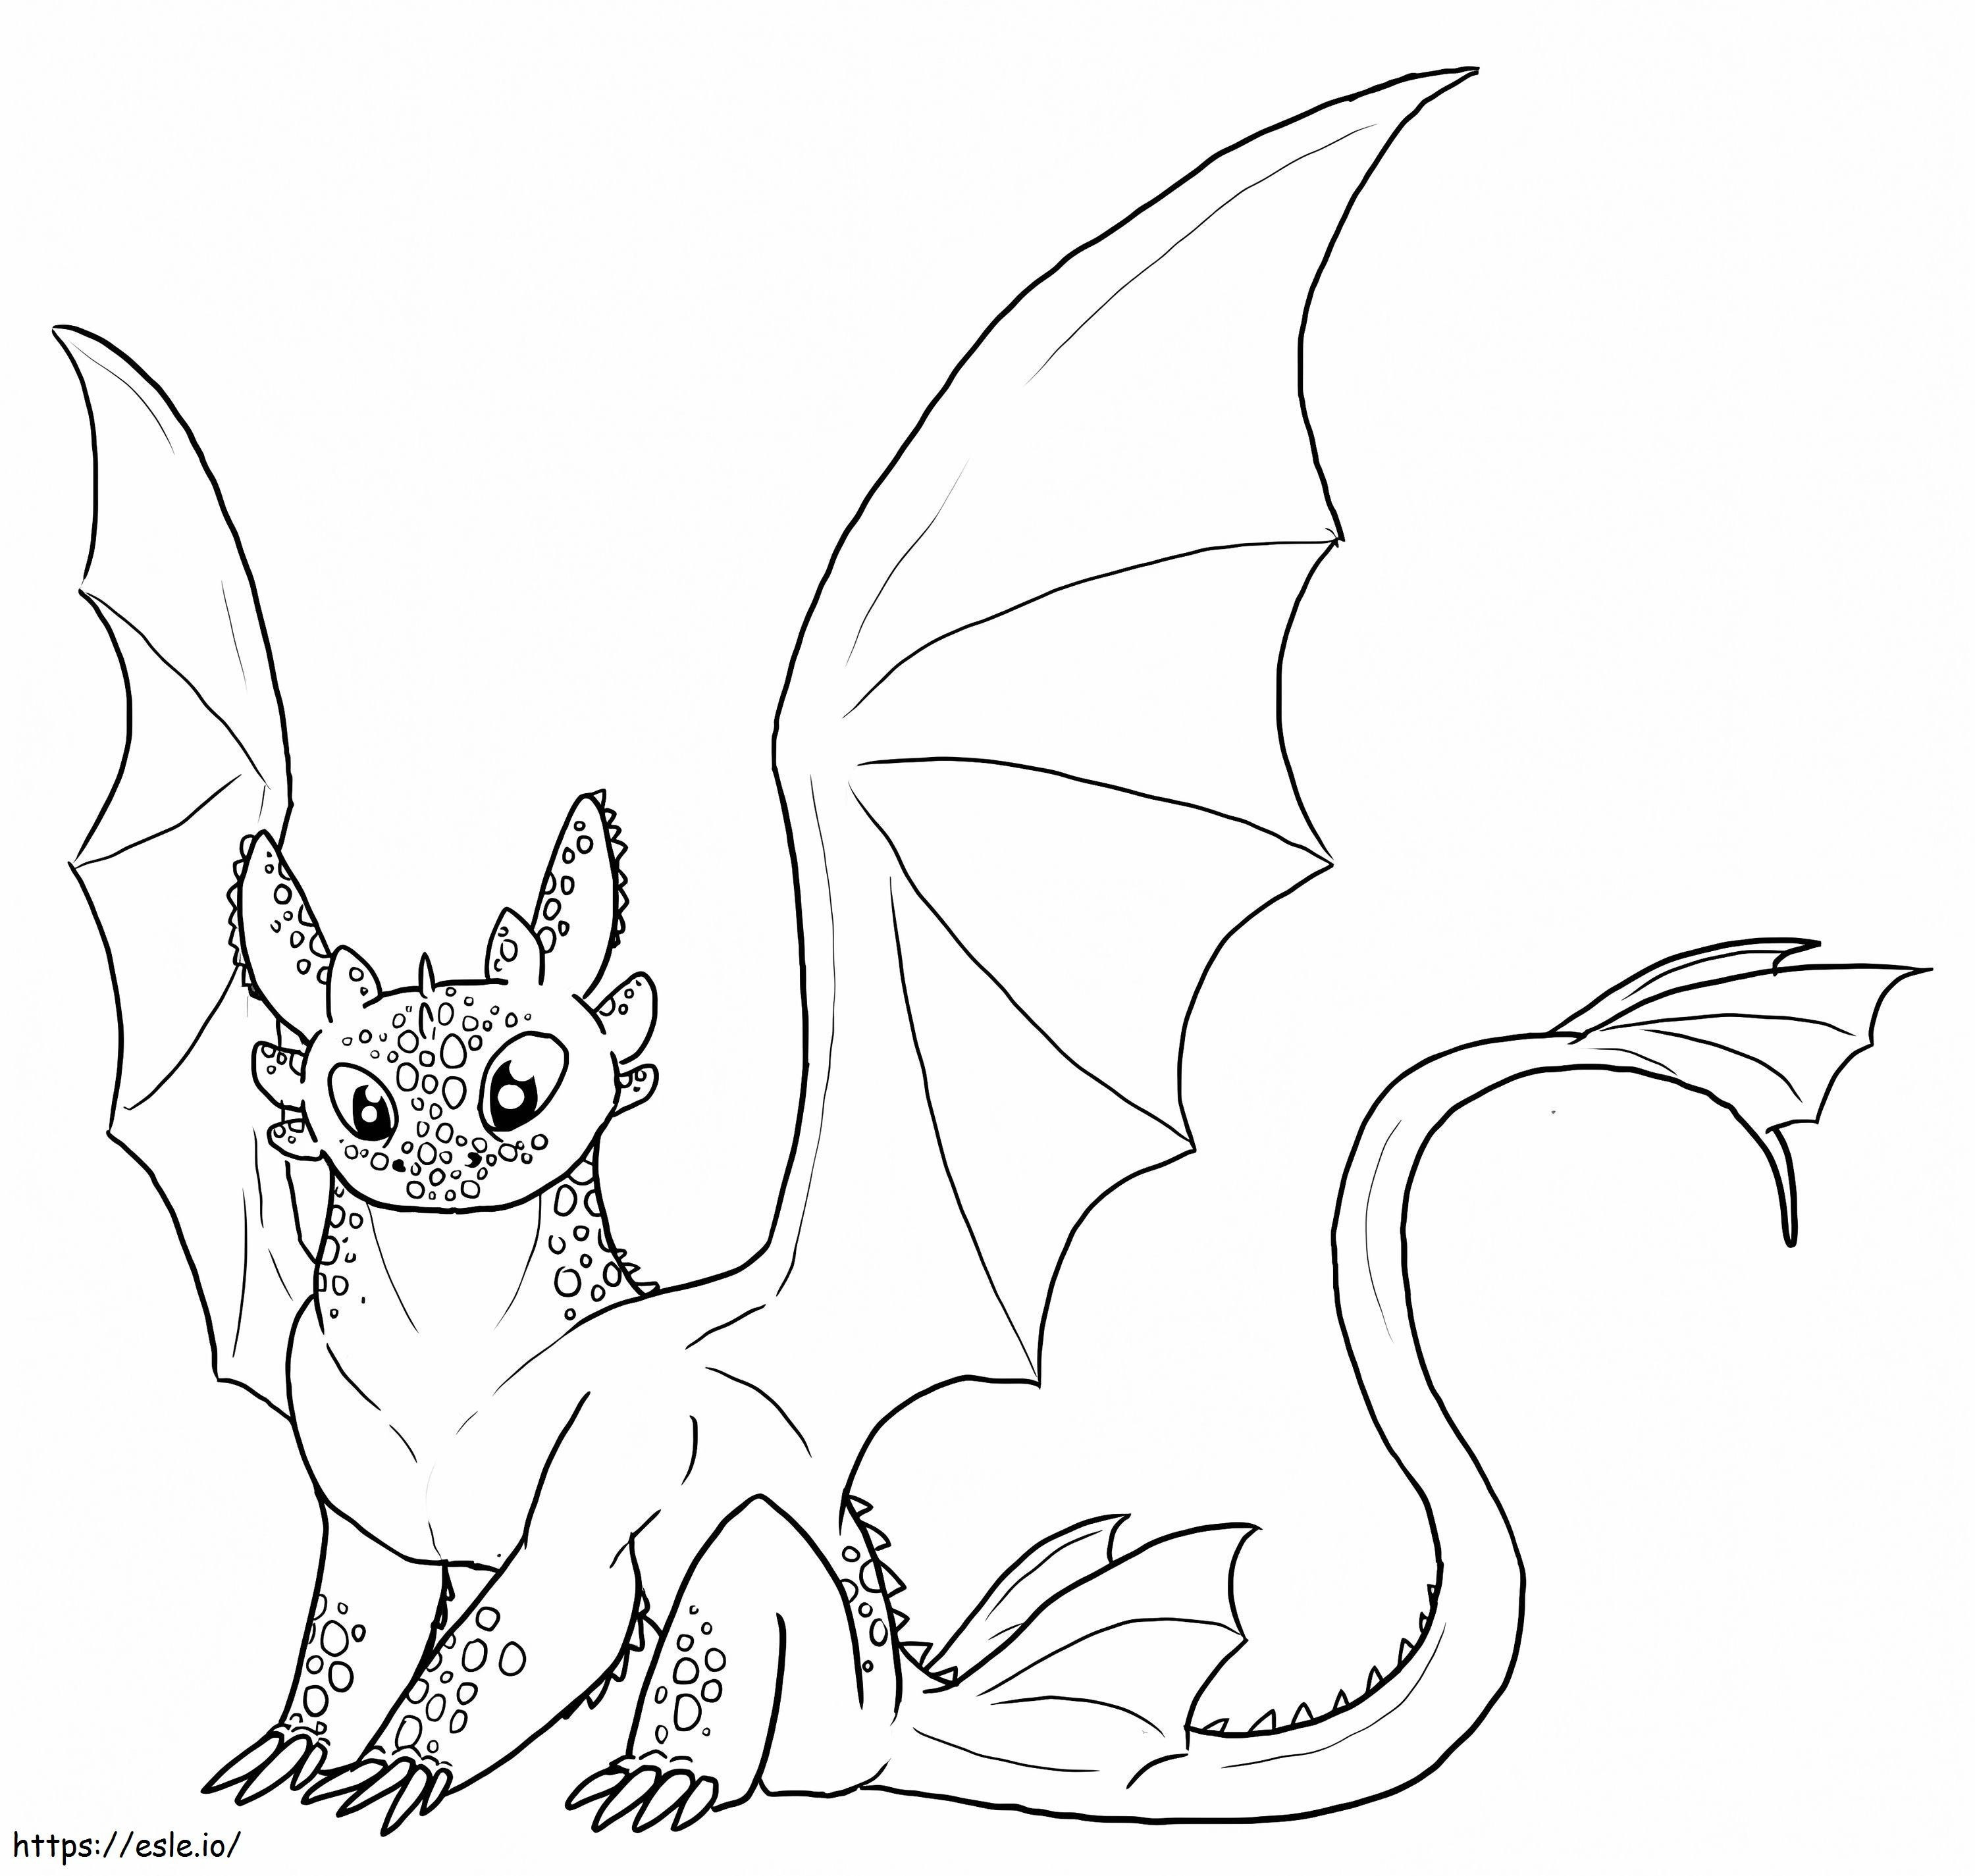 Cute Toothless coloring page